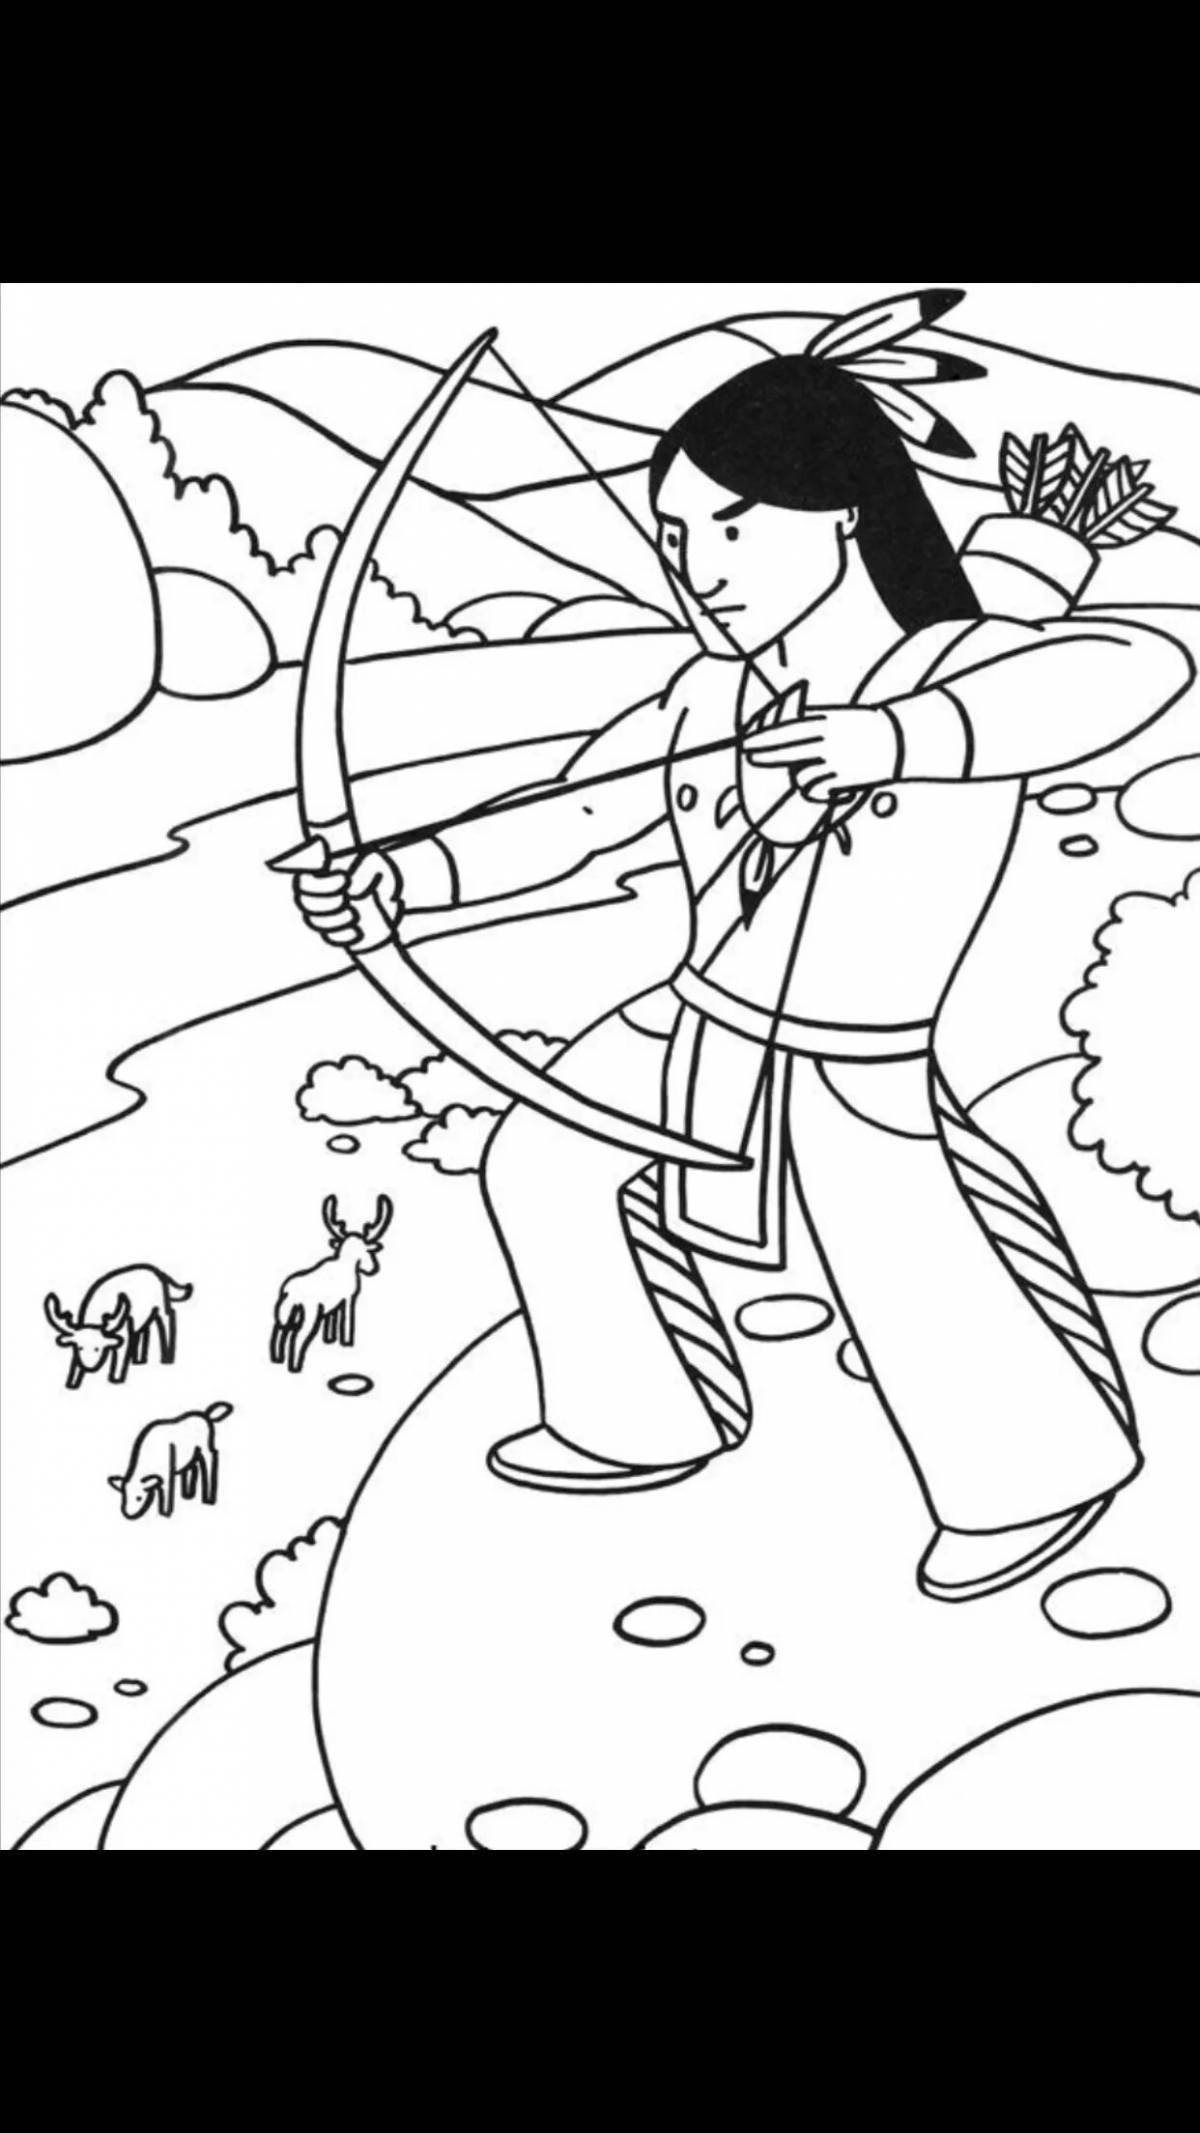 Fun Indian coloring pages